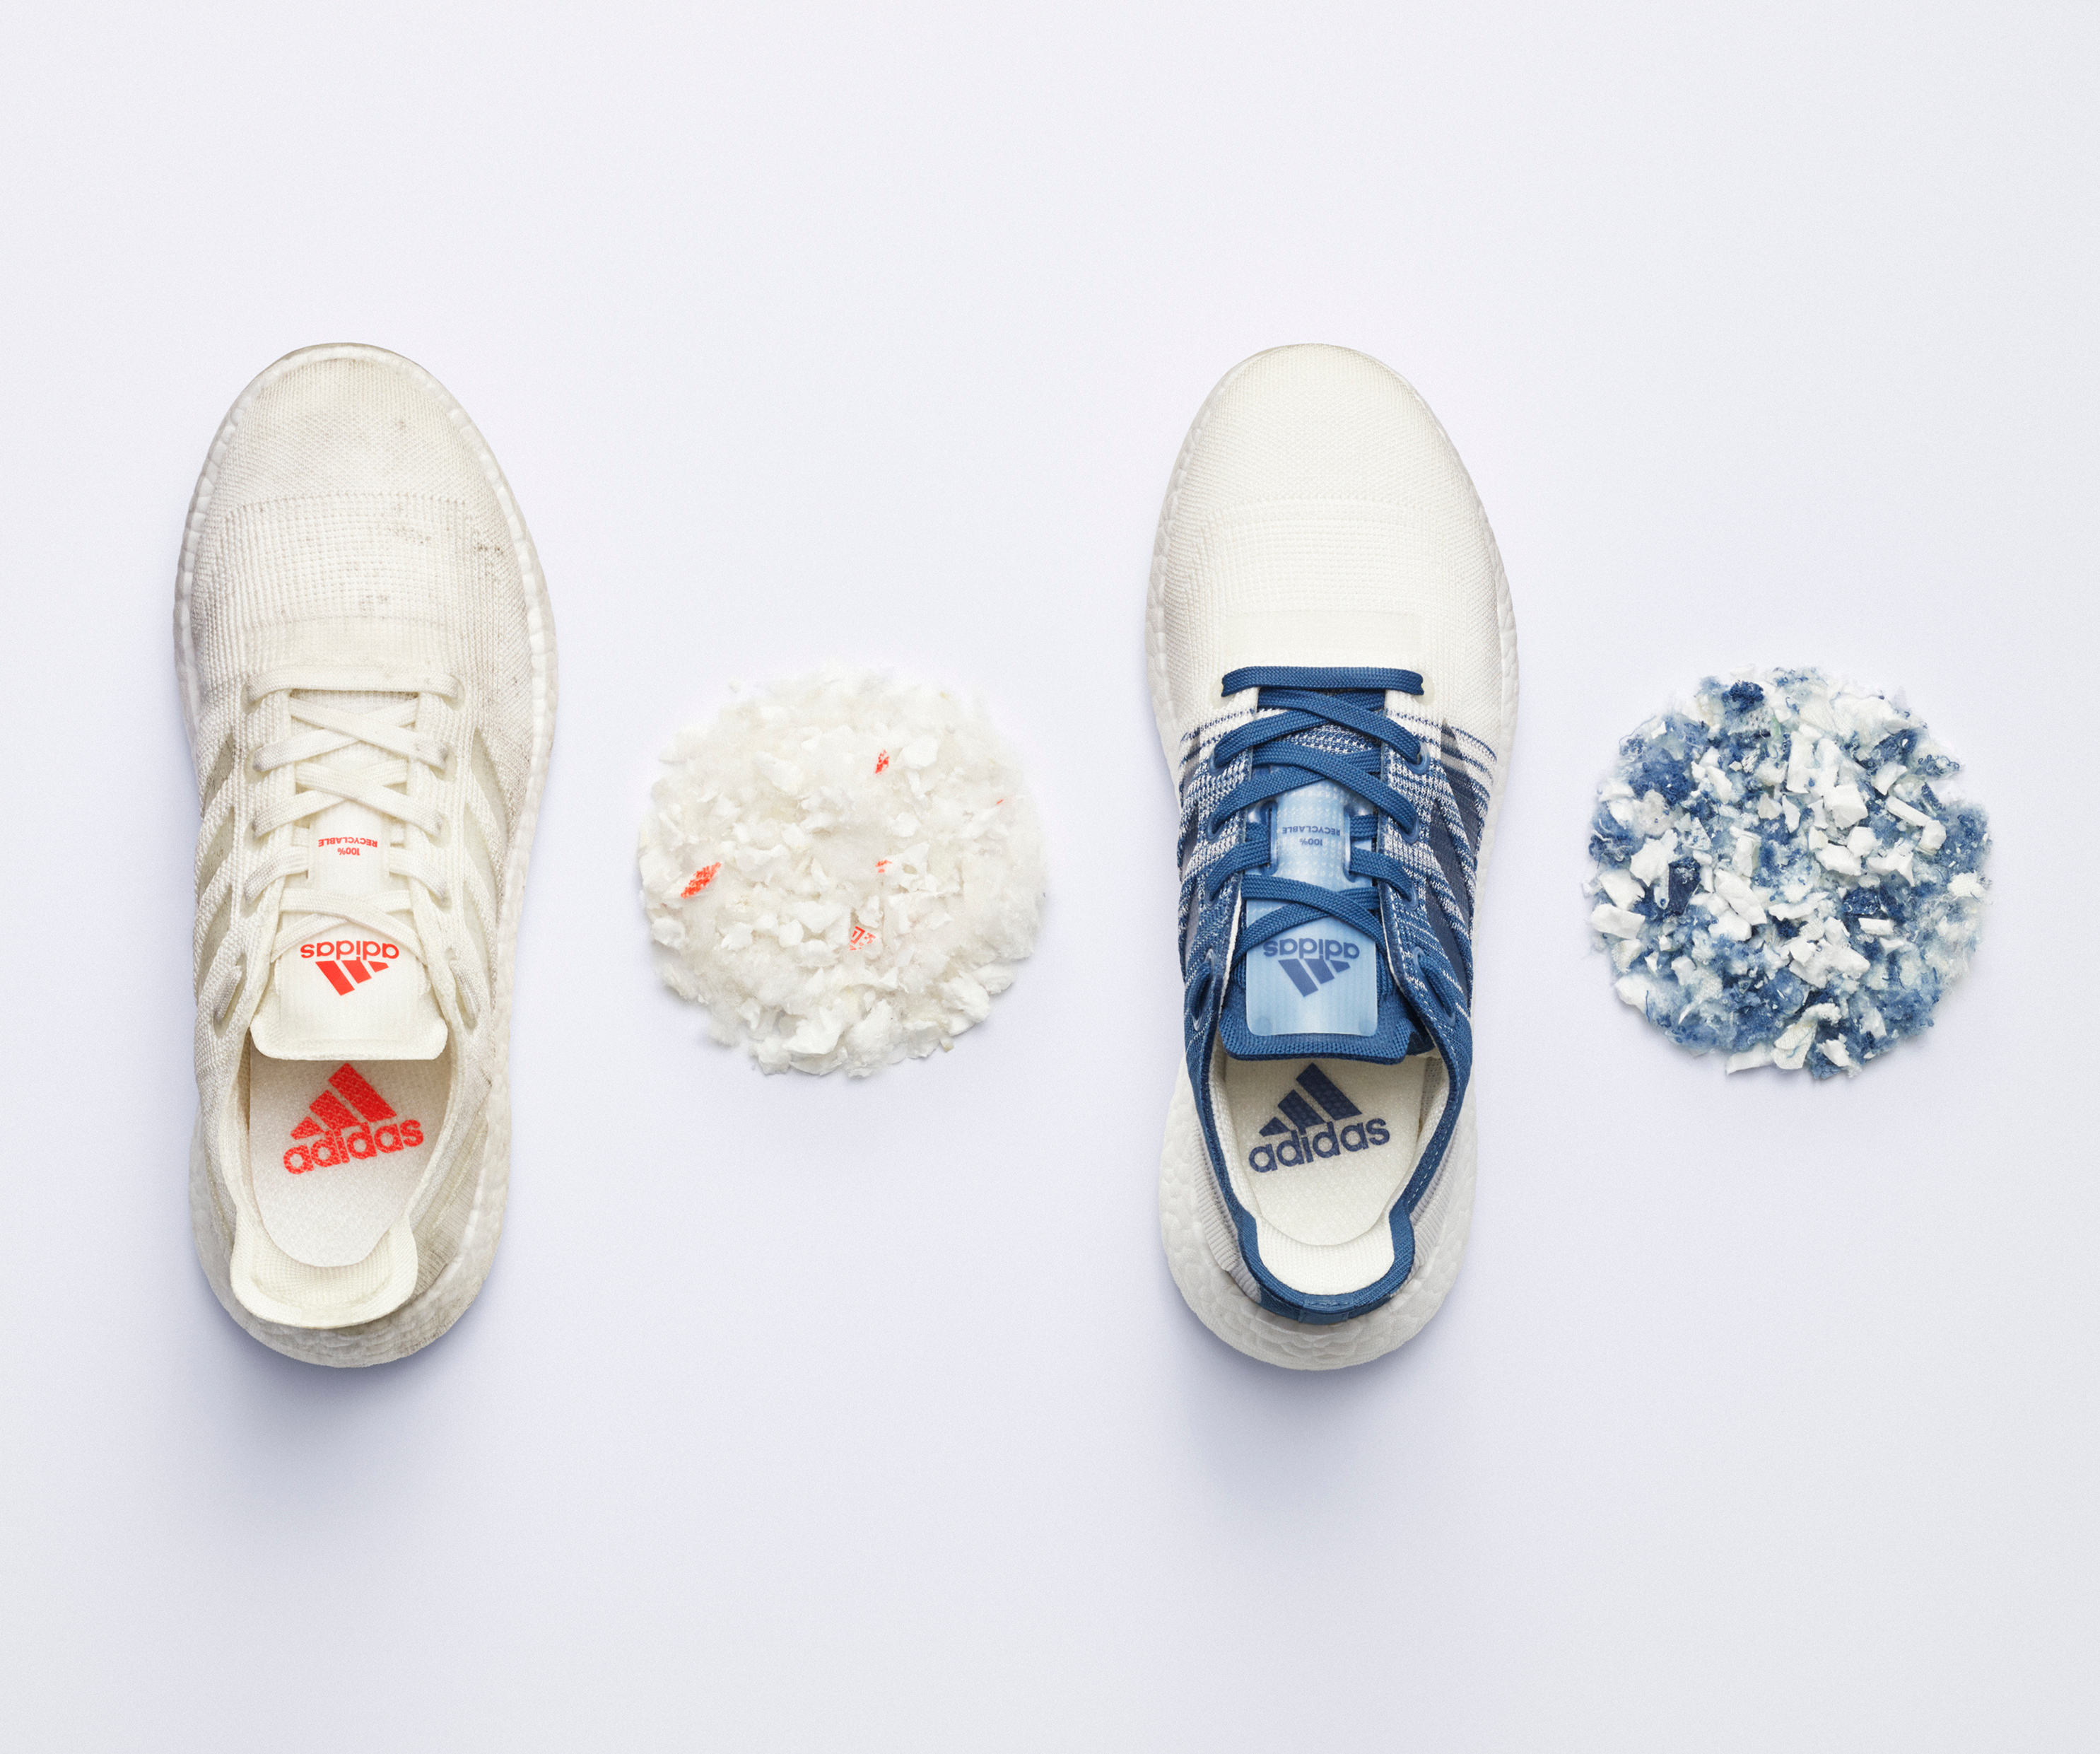 Merecer práctica primer ministro Adidas Increasing Usage of Recycled Plastics in its Products | Plastics  Technology